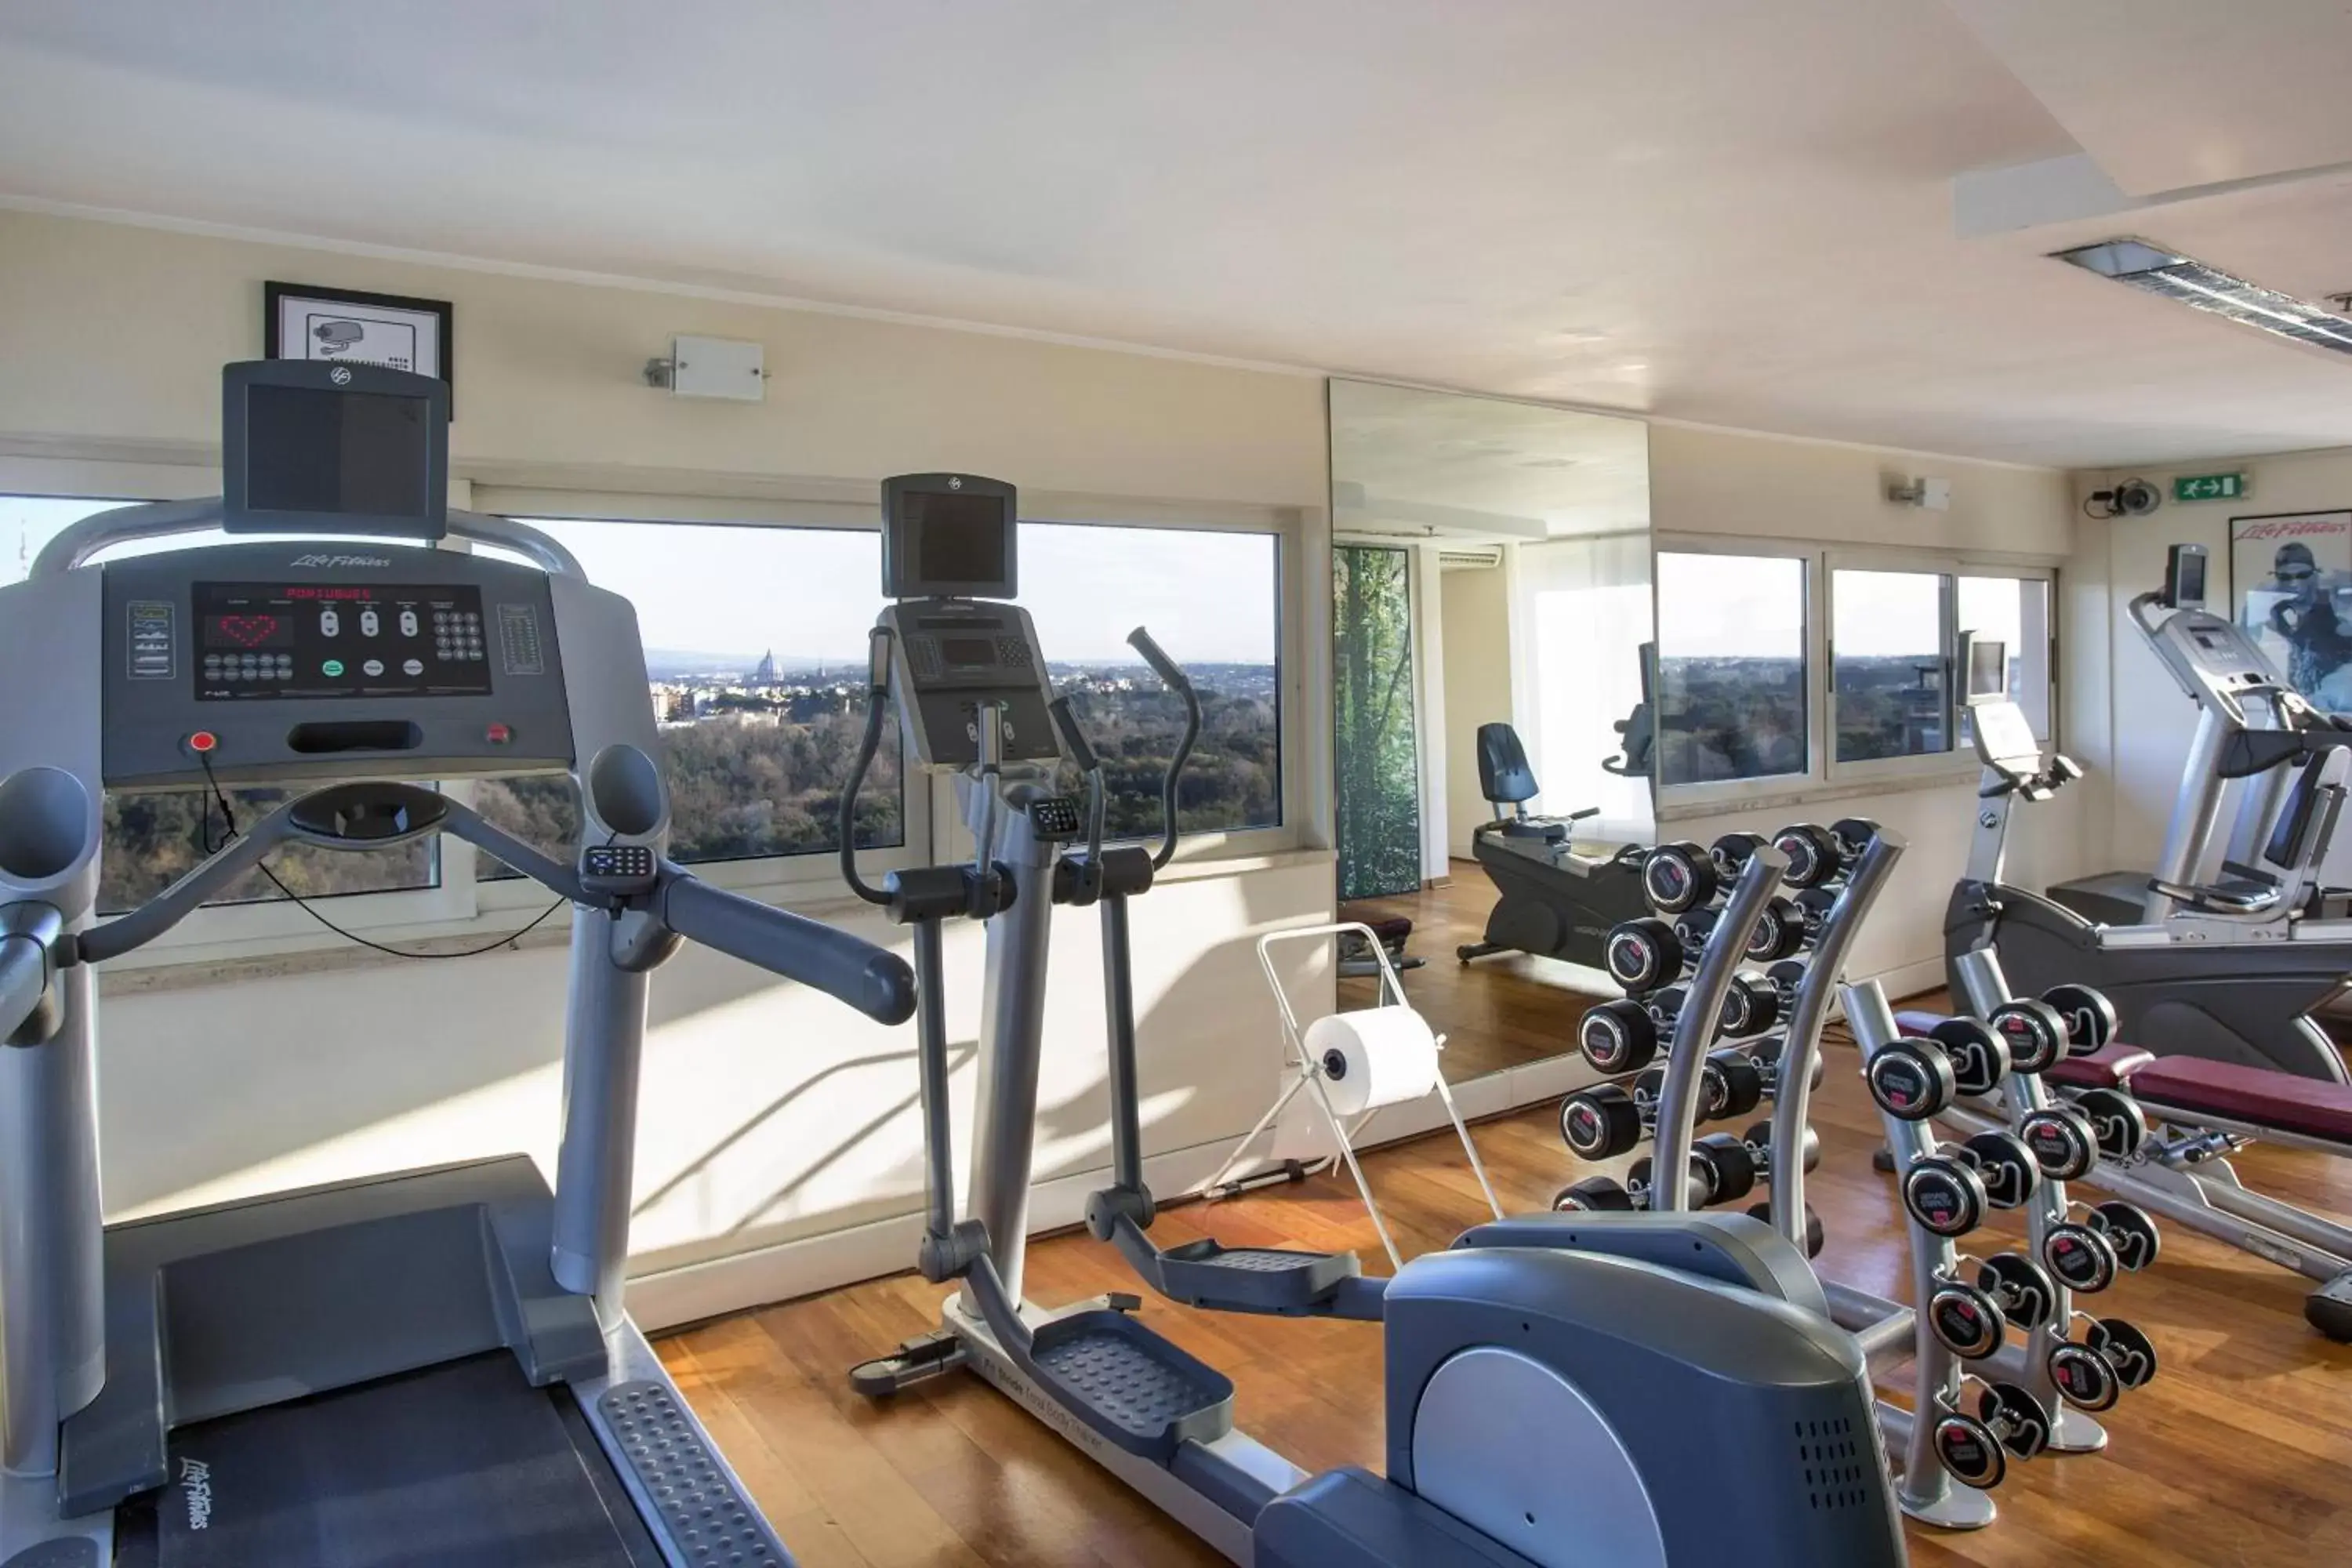 Fitness centre/facilities, Fitness Center/Facilities in Courtyard by Marriott Rome Central Park